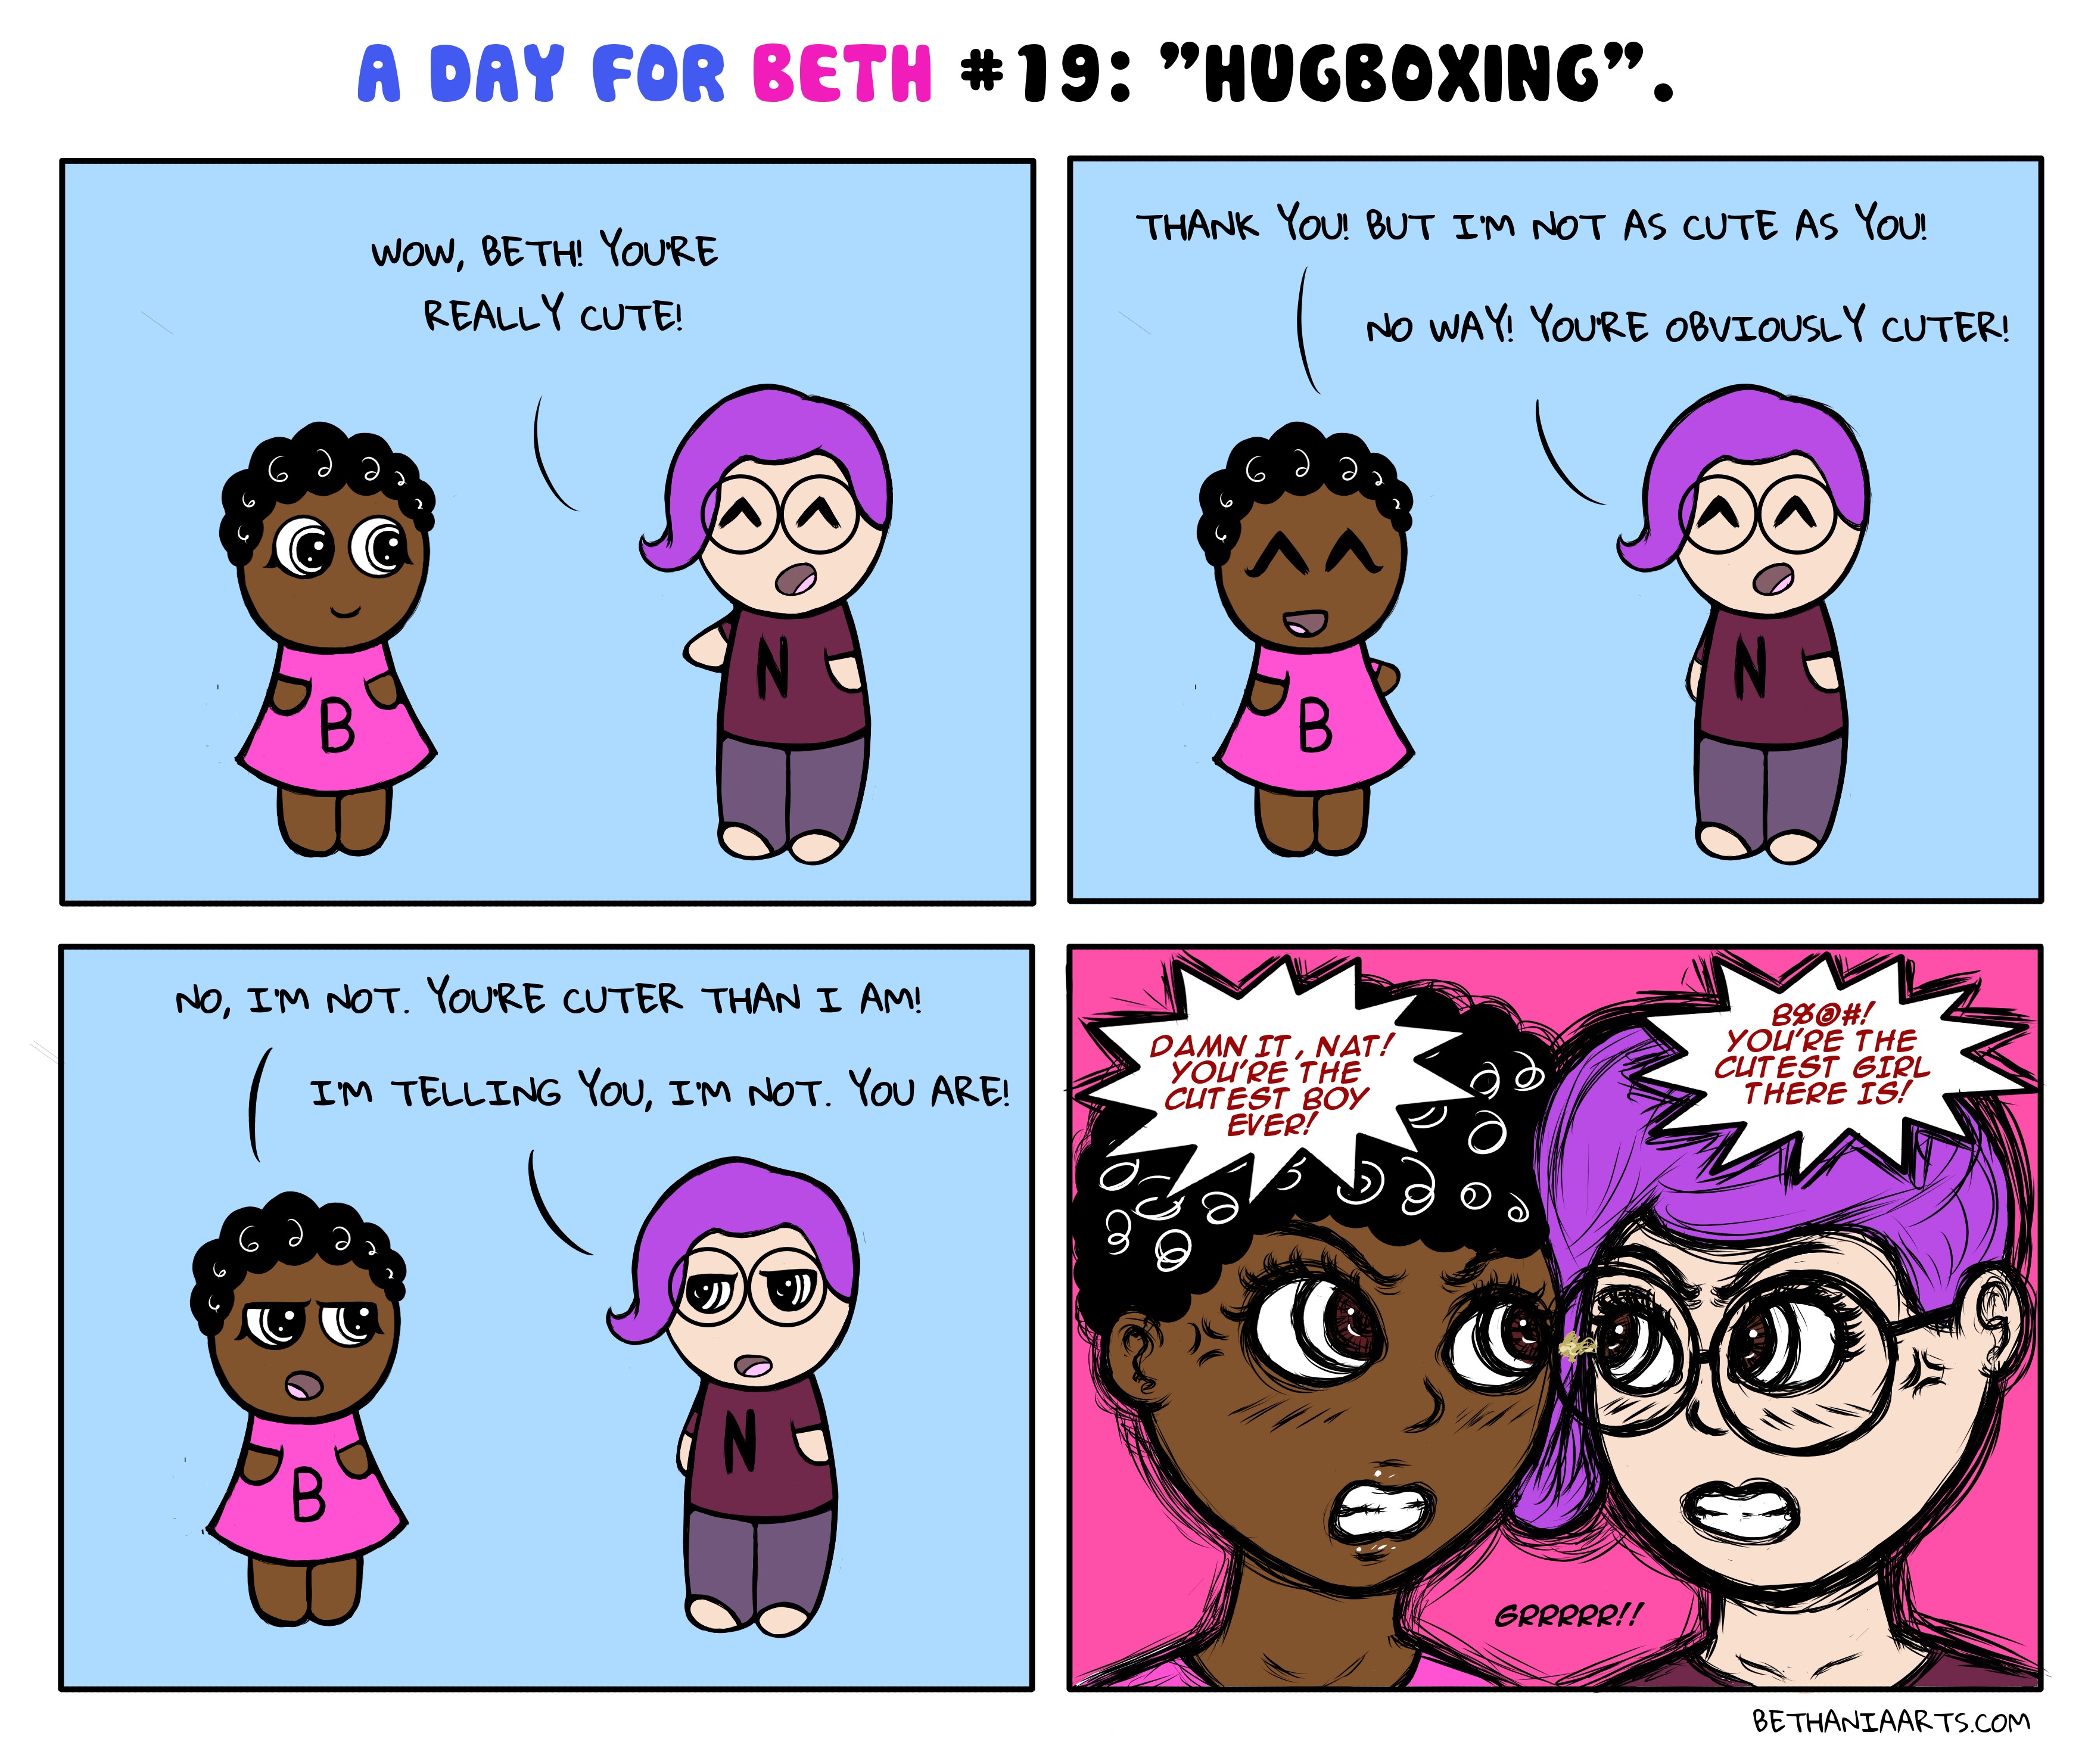 A Day For Beth #19: Hugboxing.